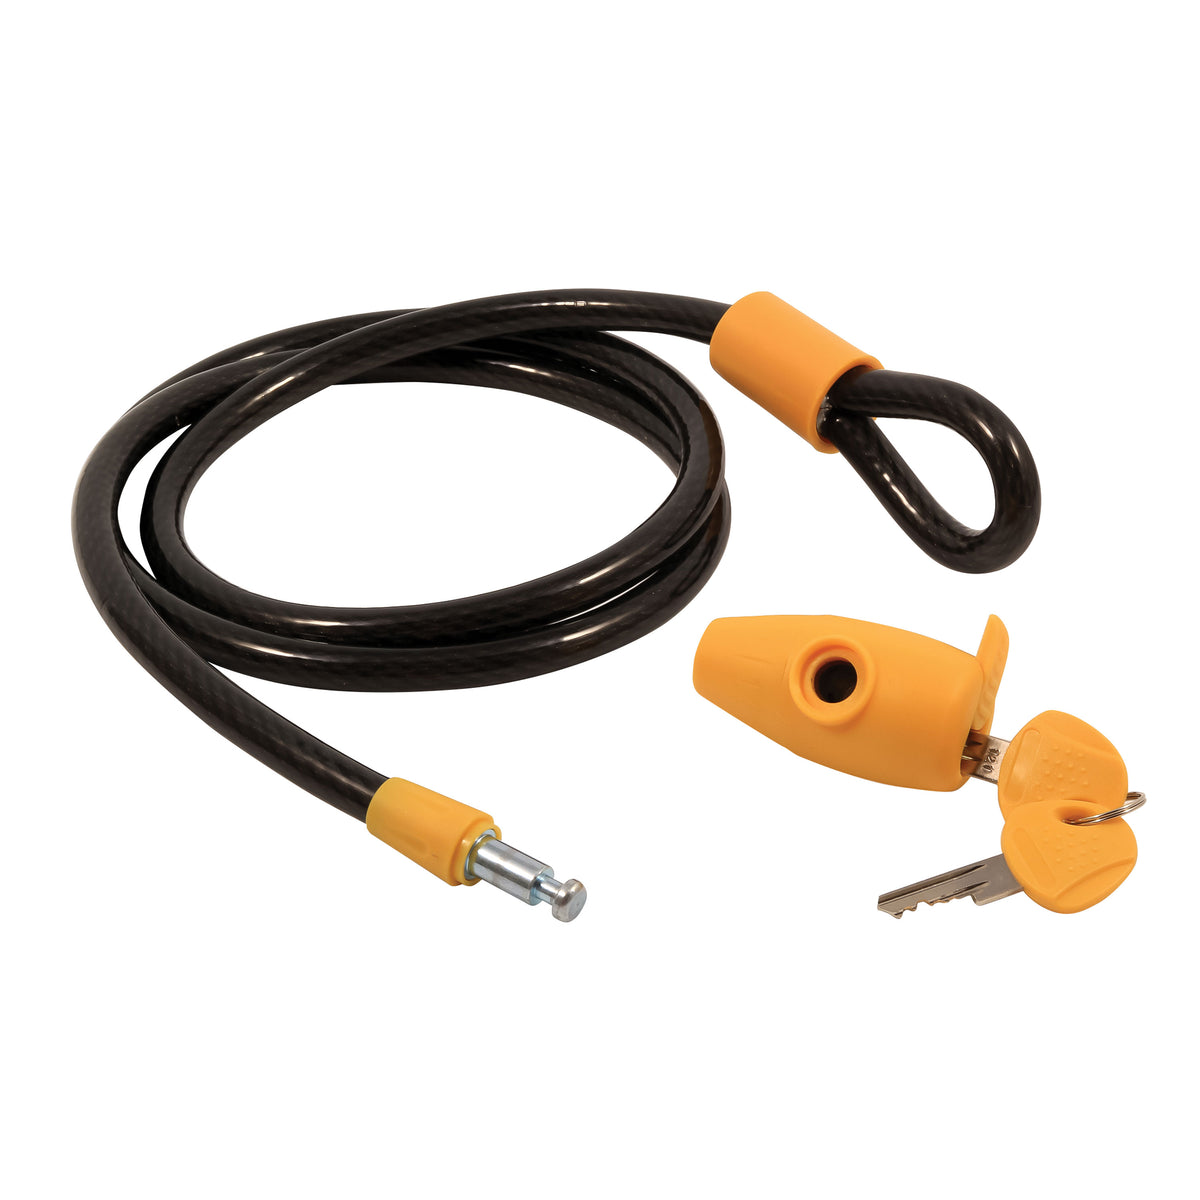 Camco 44290 Power Grip Cable Lock